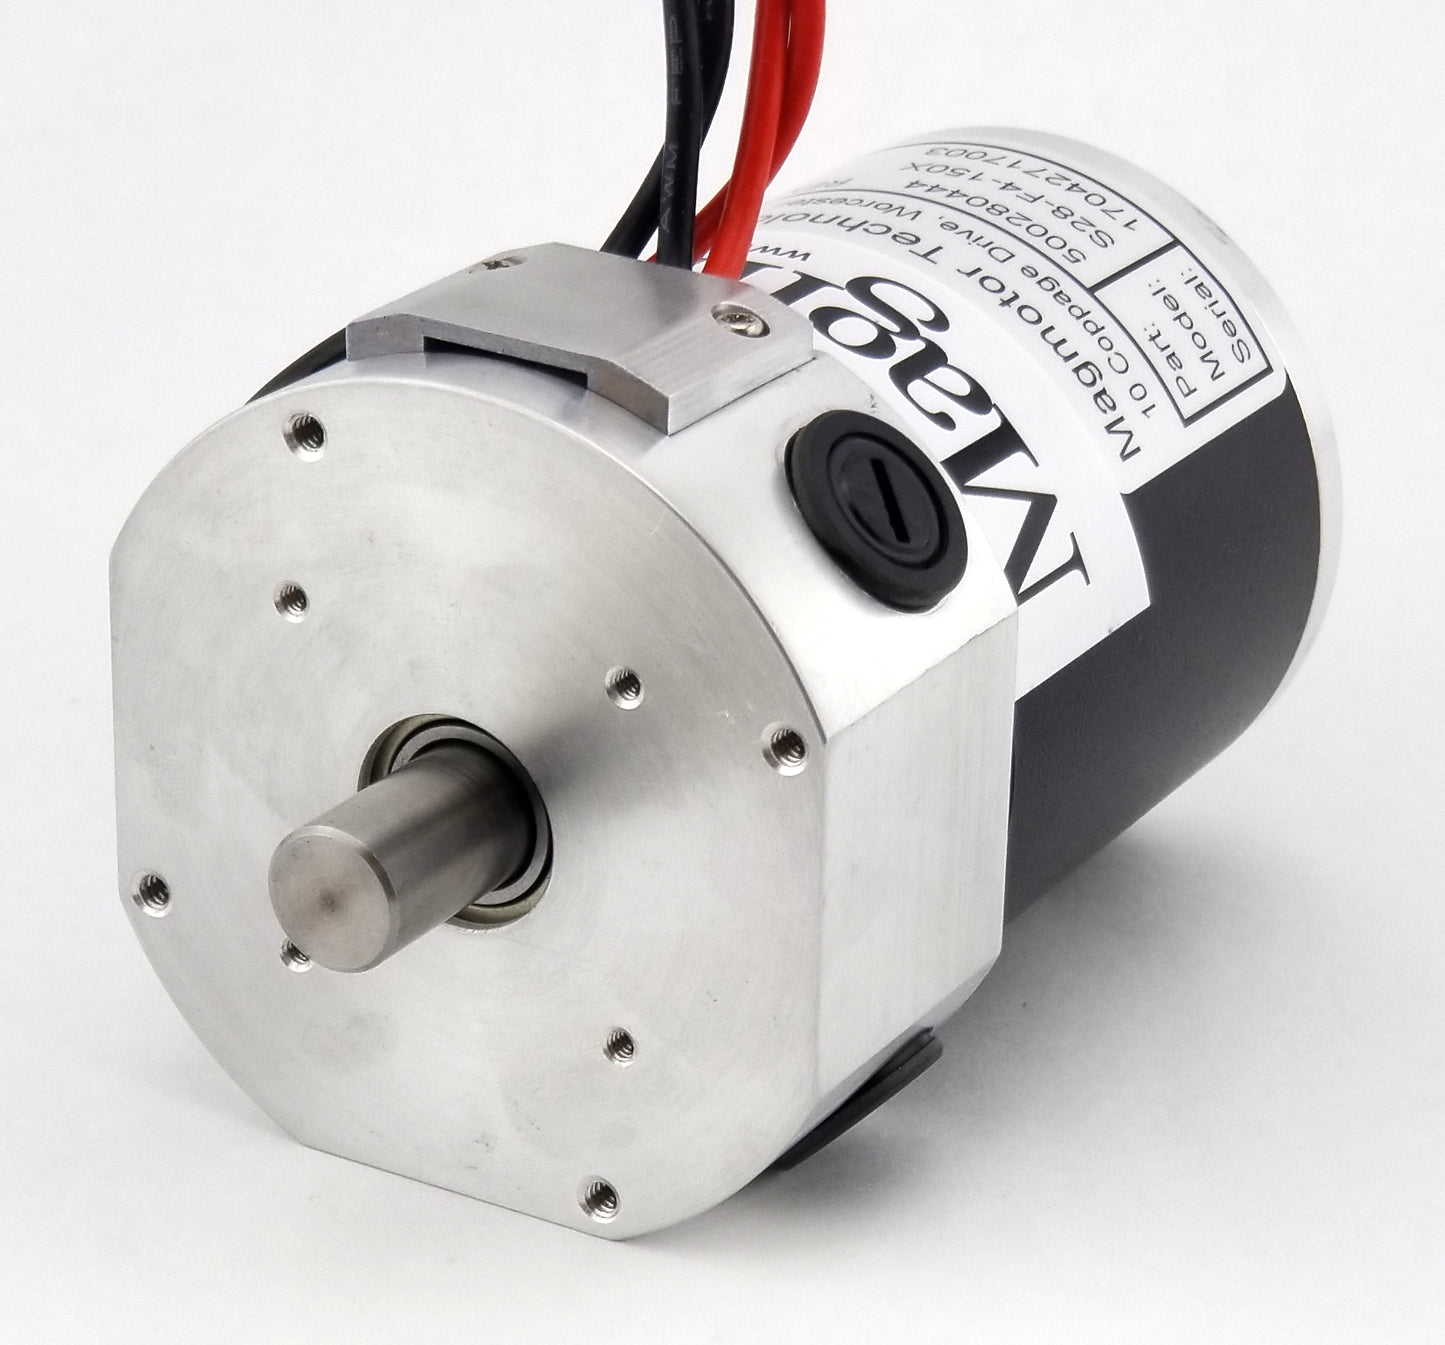 Magmotor S28-F4-150X 12 to 24 Volt 4 Pole Brushed Combat Motor 500280444 Slim Design Rear View